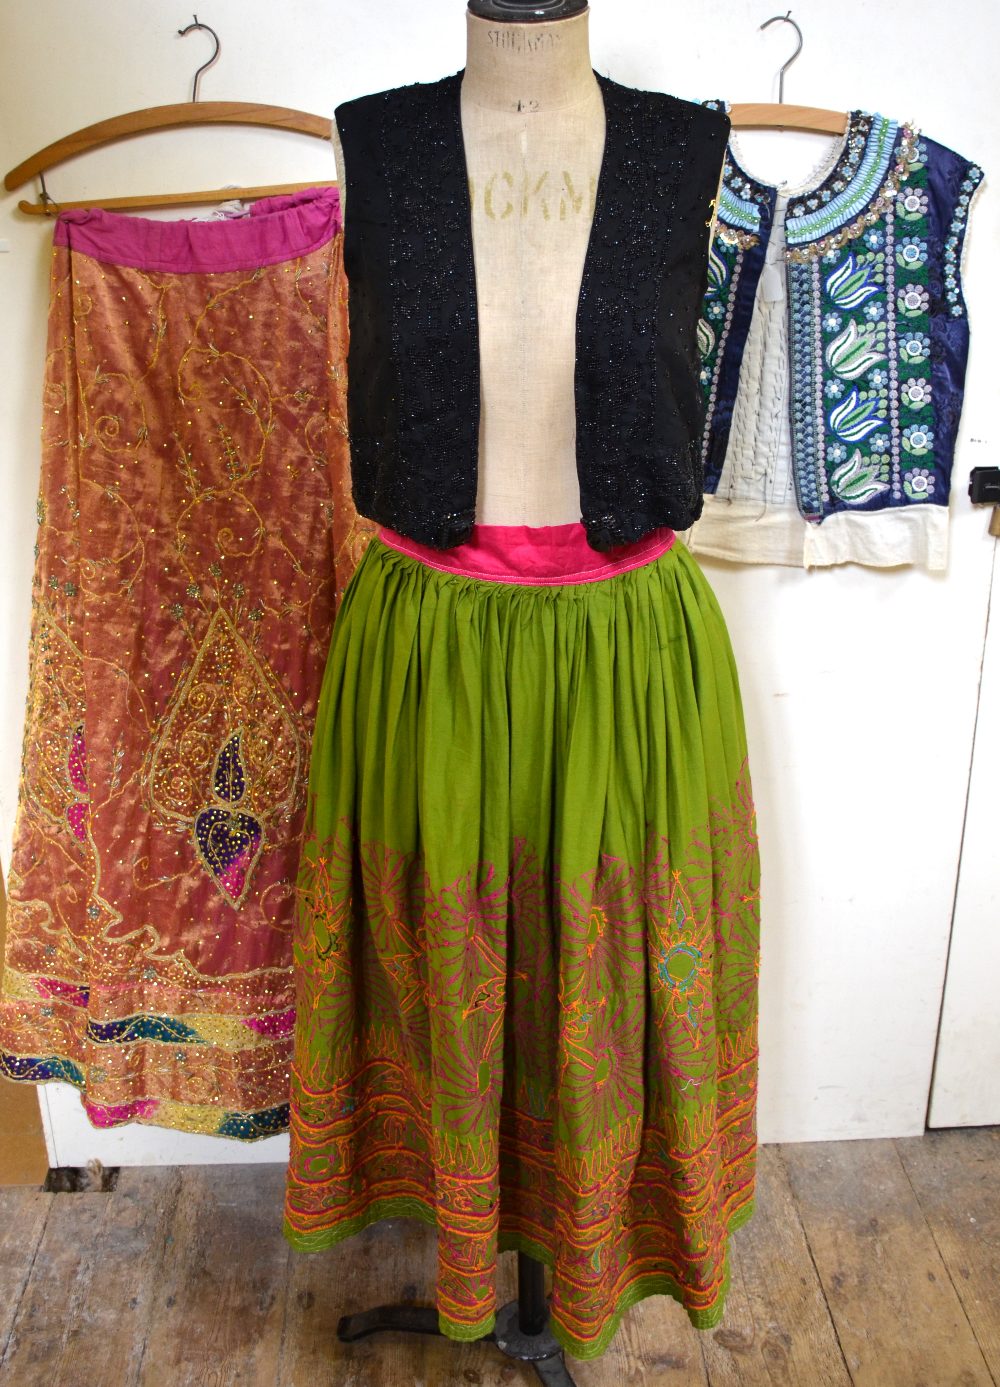 Long green cotton Indian skirt embroidered in bright pink and orange inset with mirrored circles and